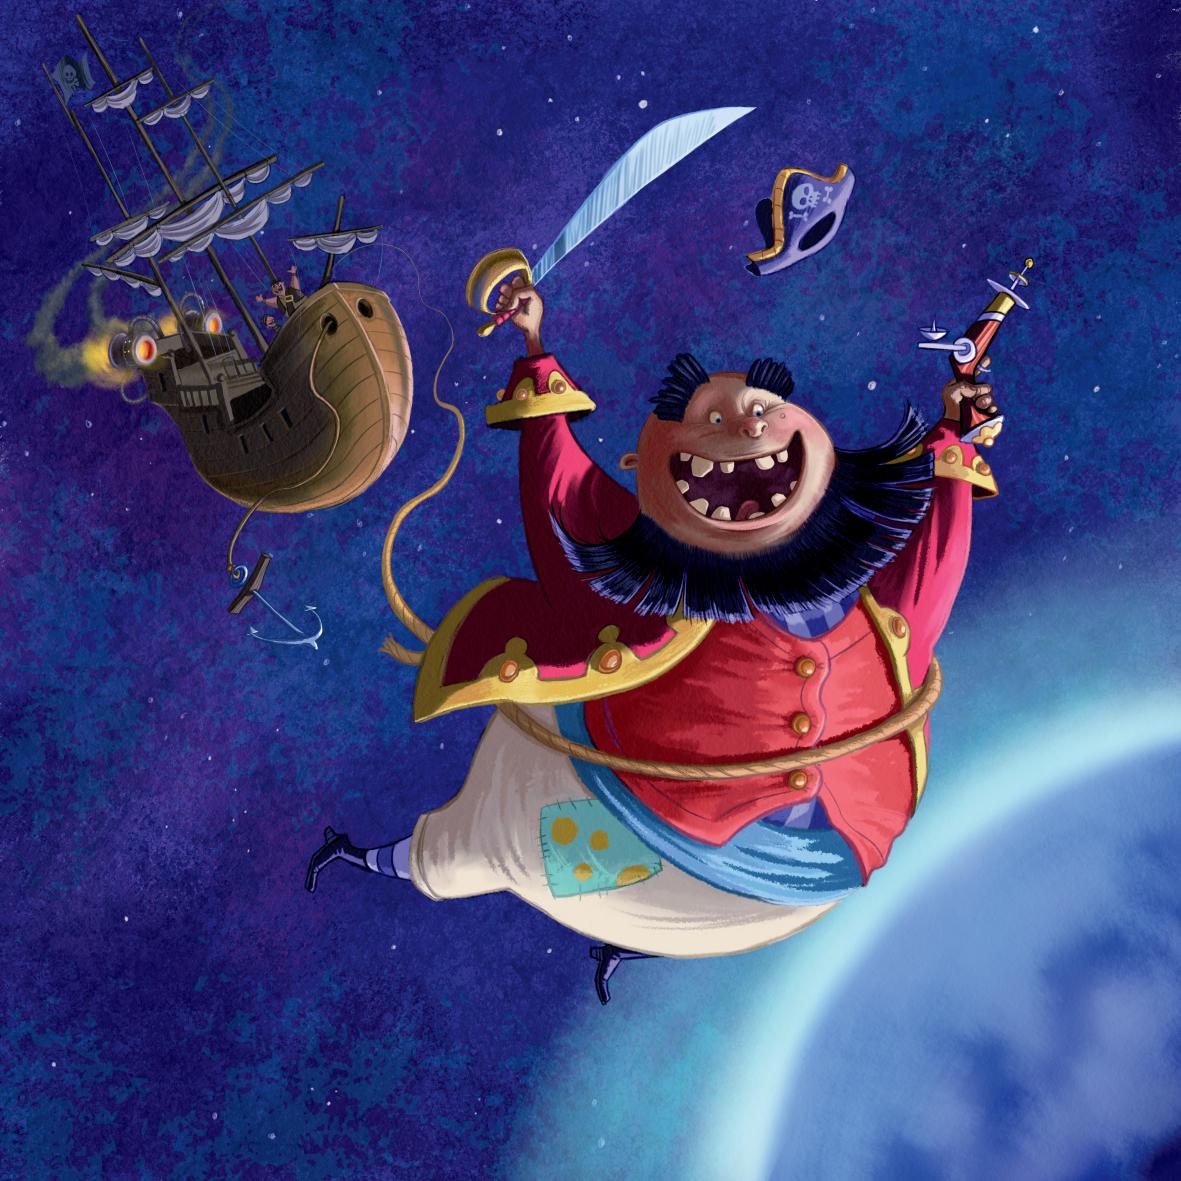 Piratey things in space. #illustration #characters #childrensbooks #kidlitart #picturebooks #artwork #illustrations #pirates #painting catling-art.com